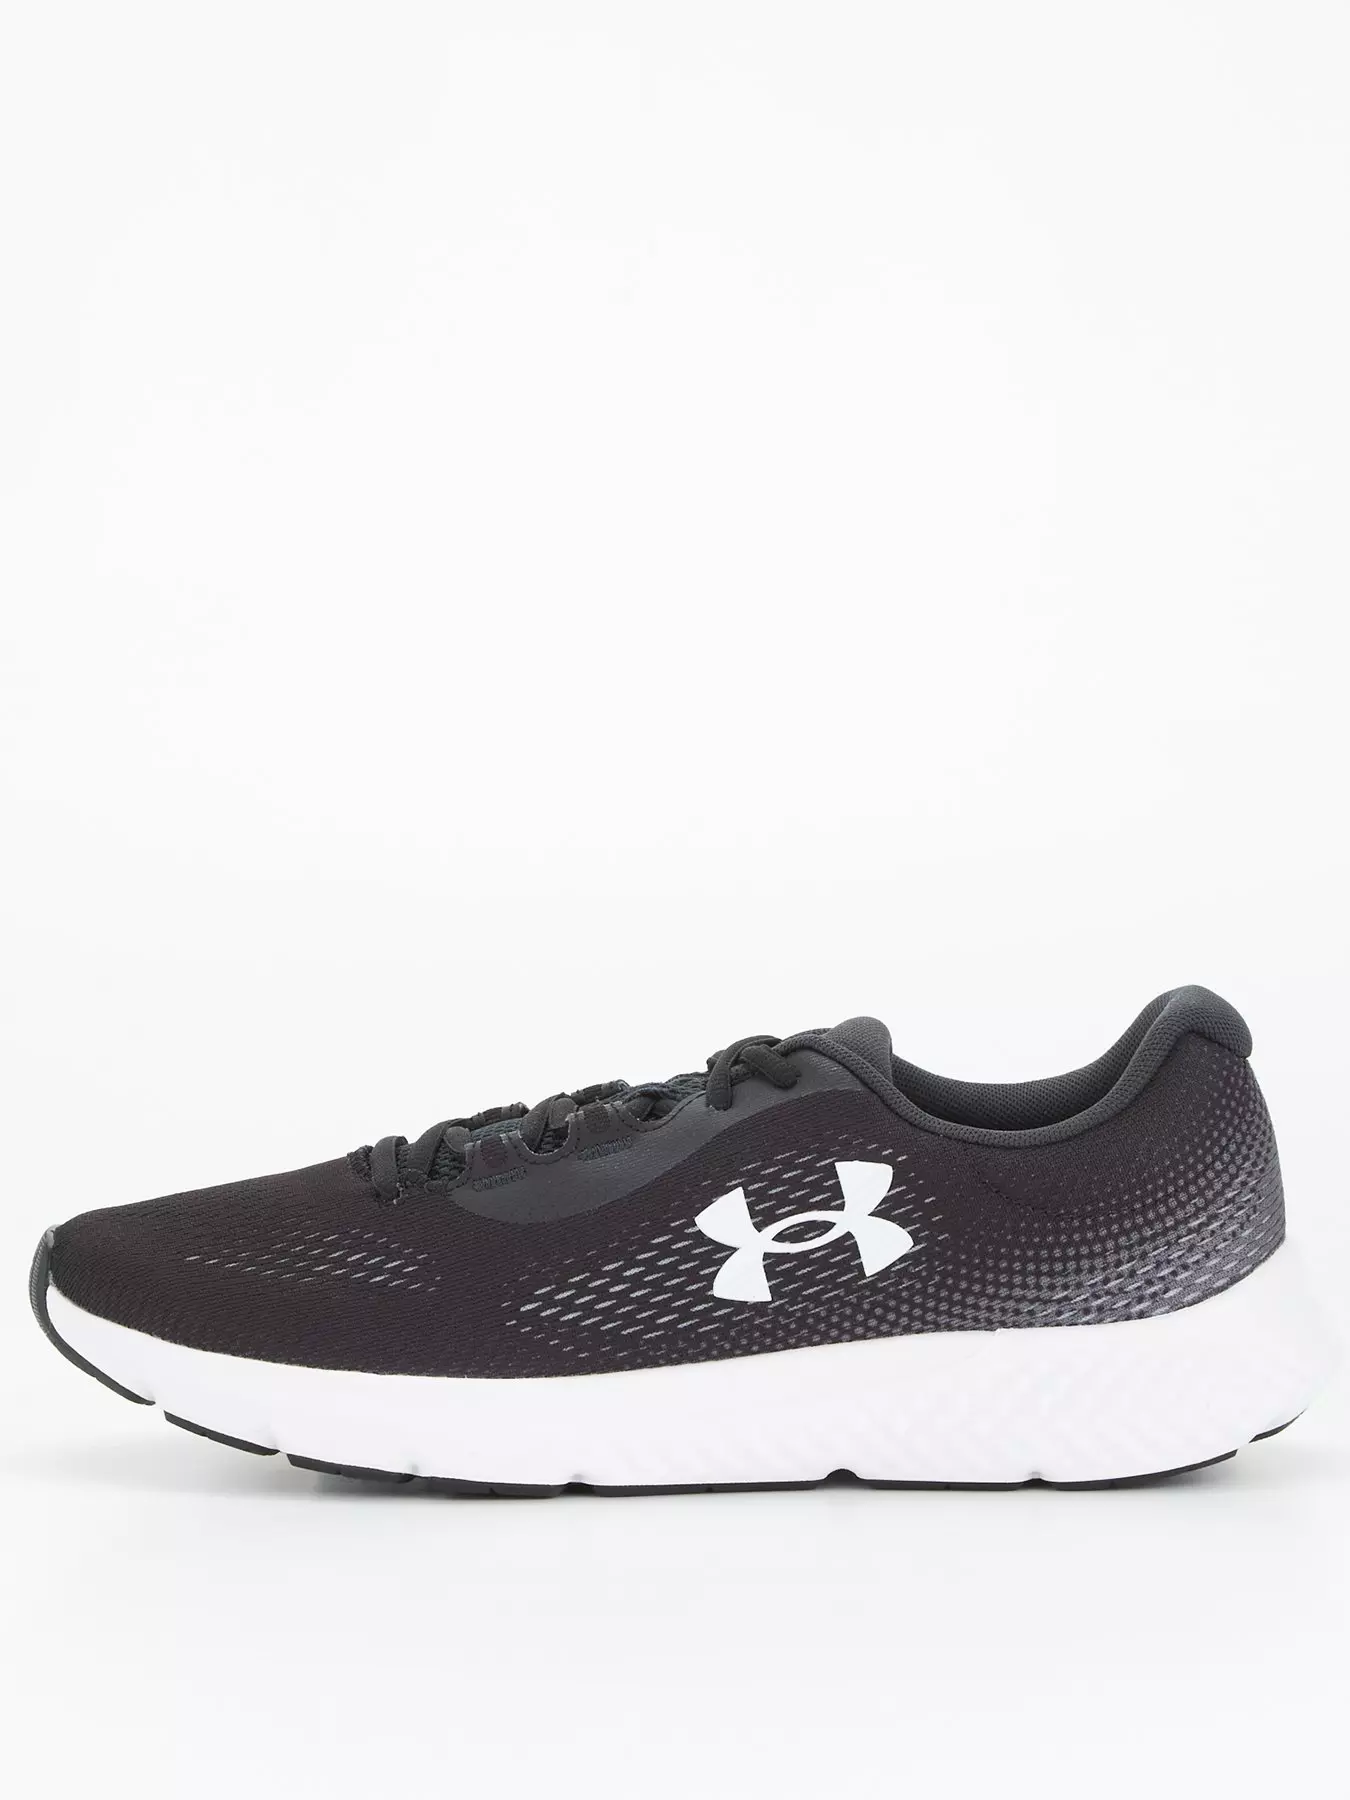 UNDER ARMOUR Men's Running Charged Pursuit 3 - BLACK/BLACK